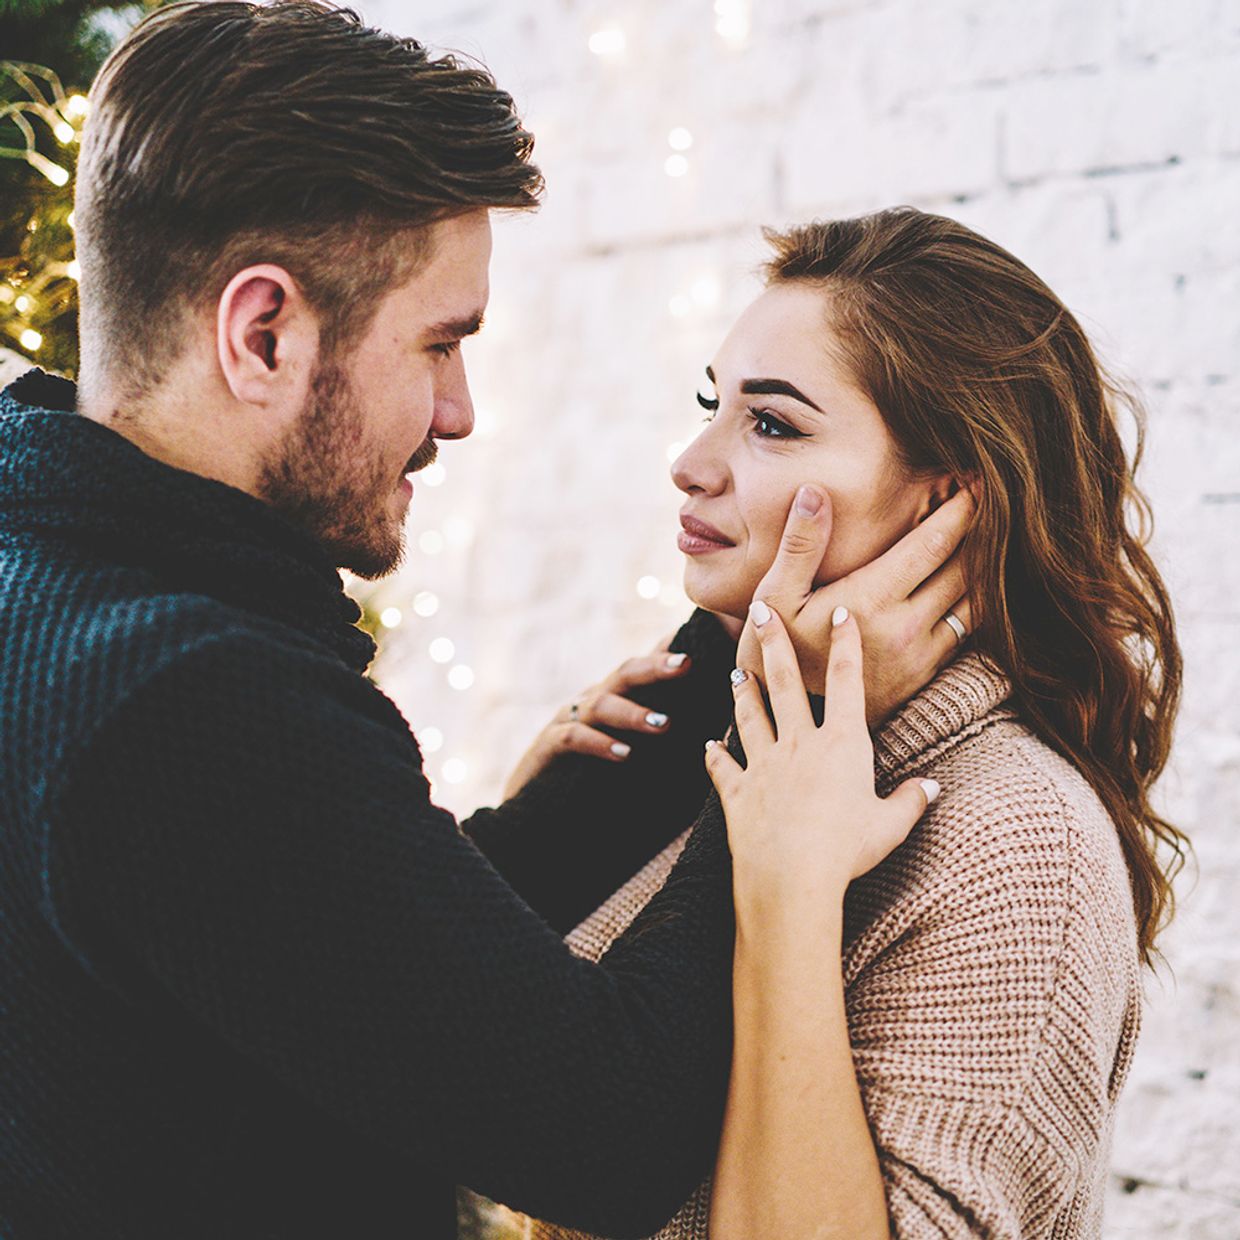 Is He Flirting With Me? 14 Signs